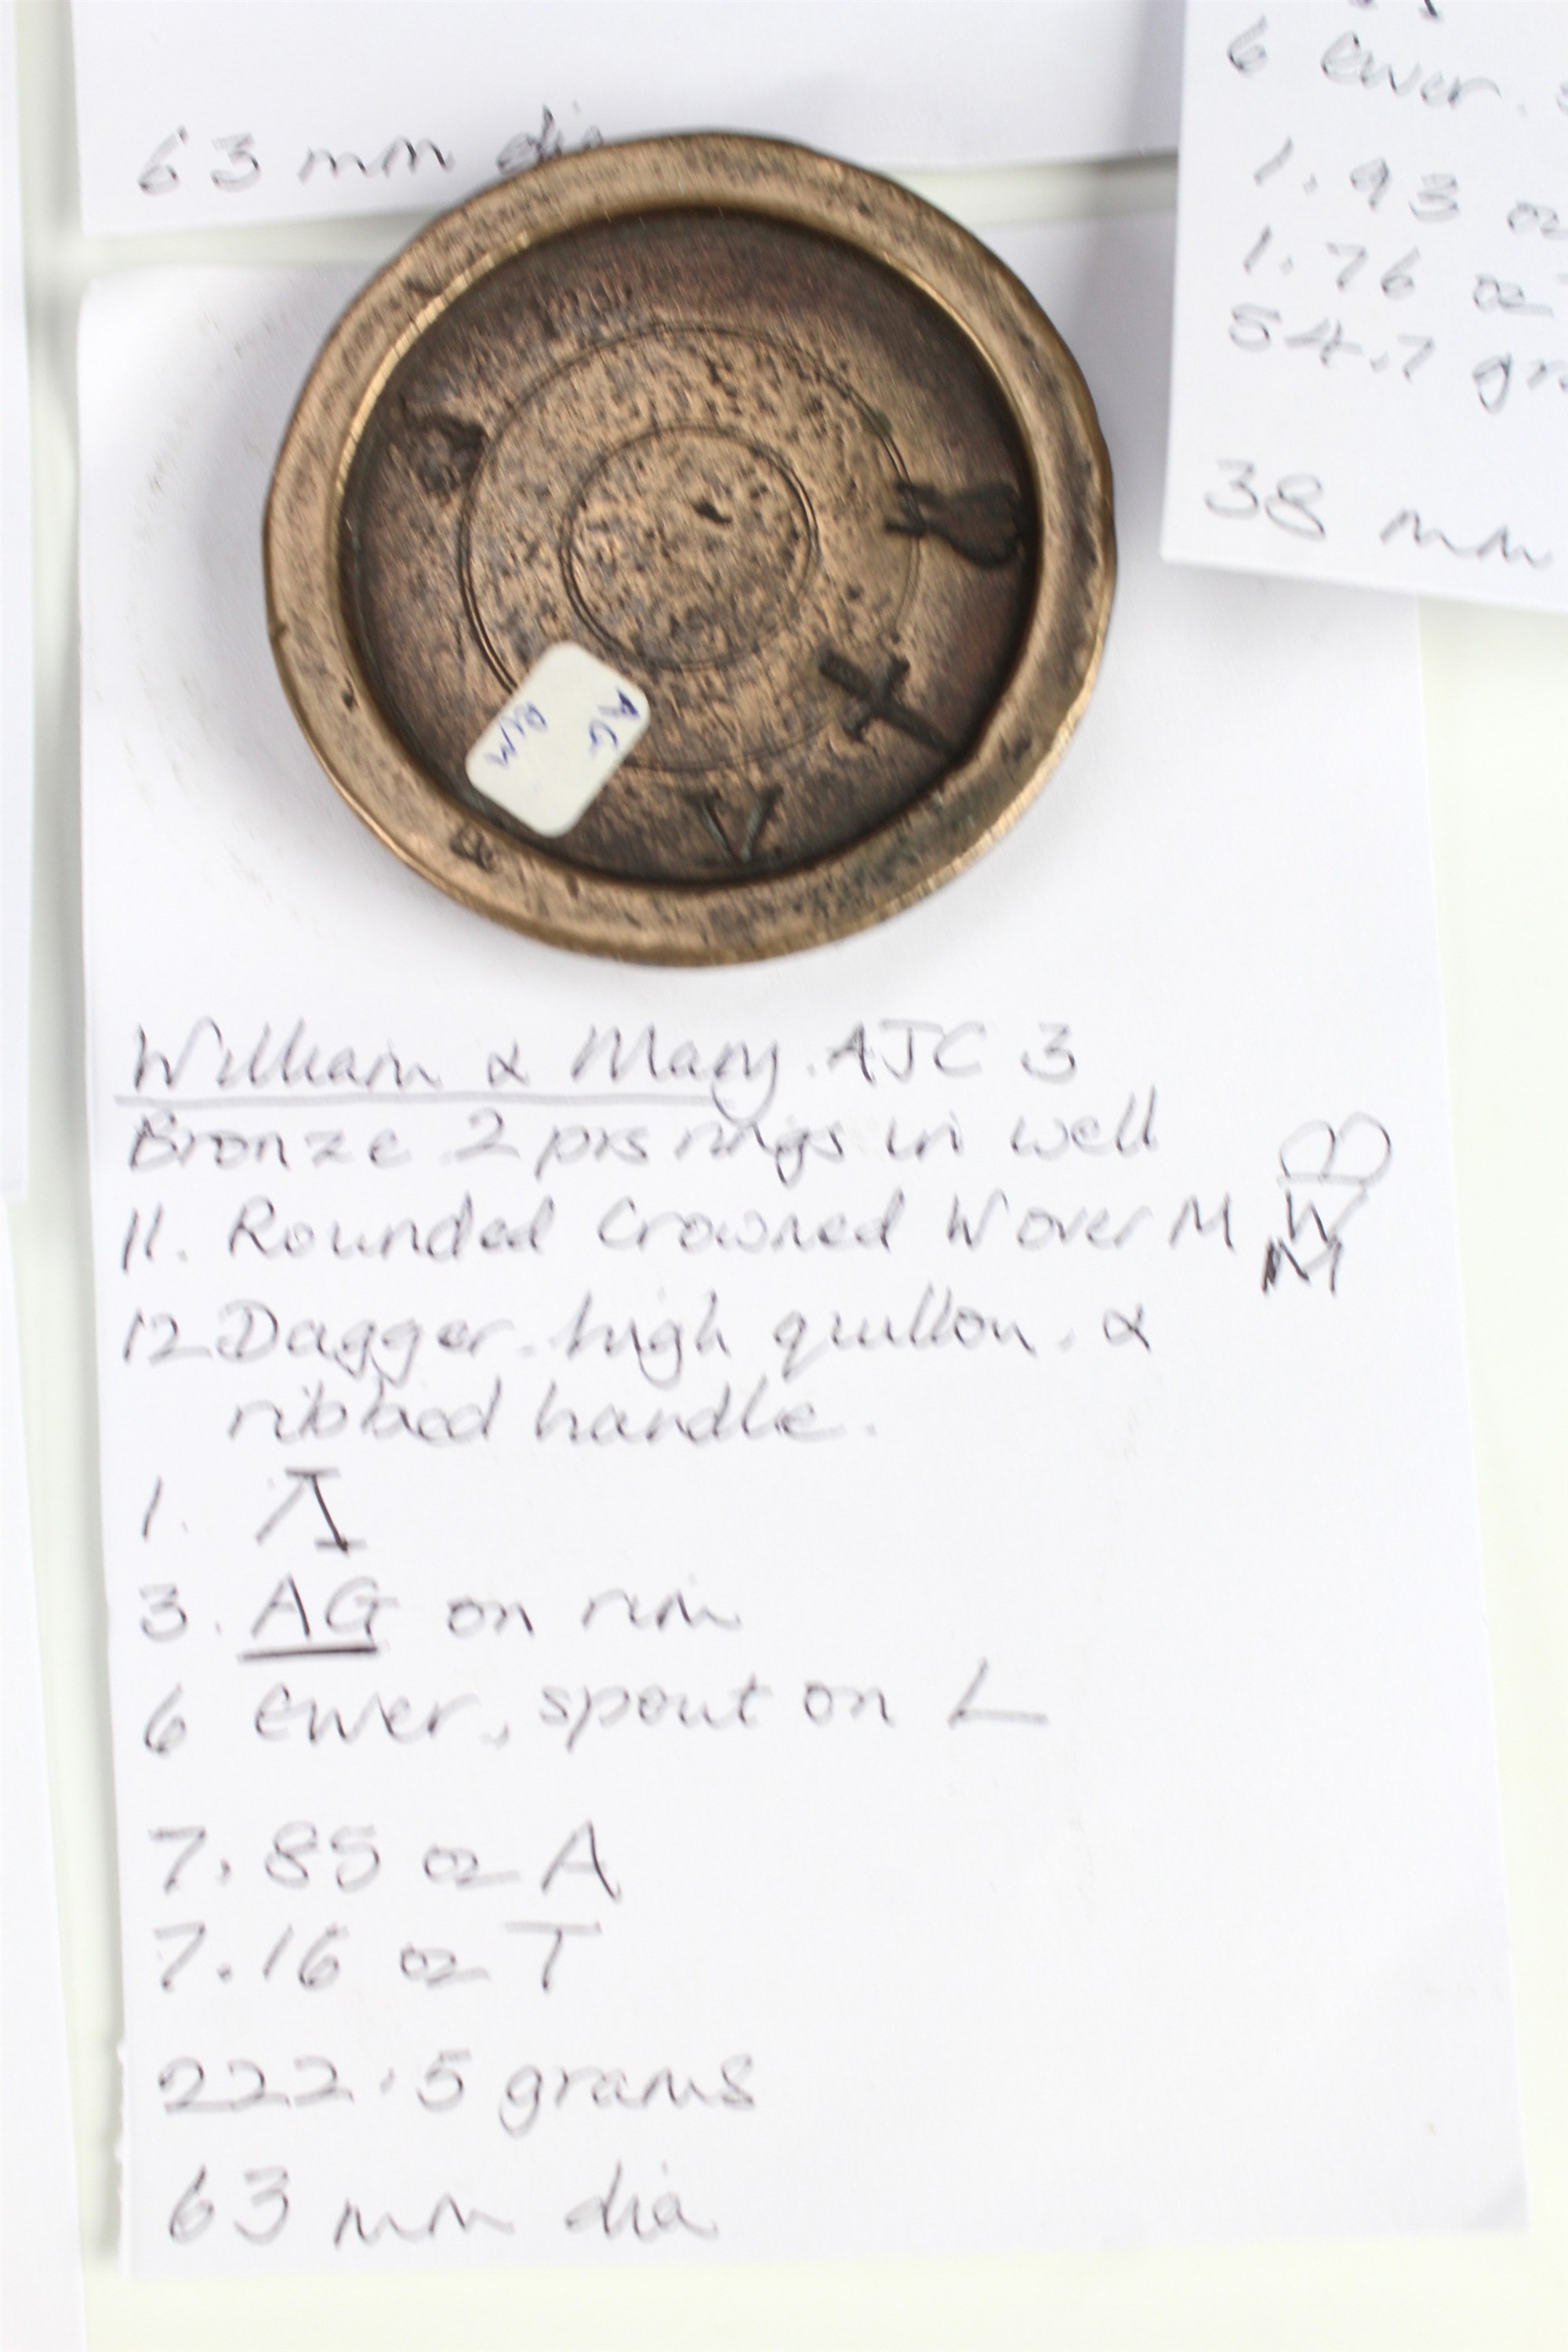 14 William and Mary bronze trade weights, including marks for 'Gloucester Co', and a chequerboard - Image 4 of 7